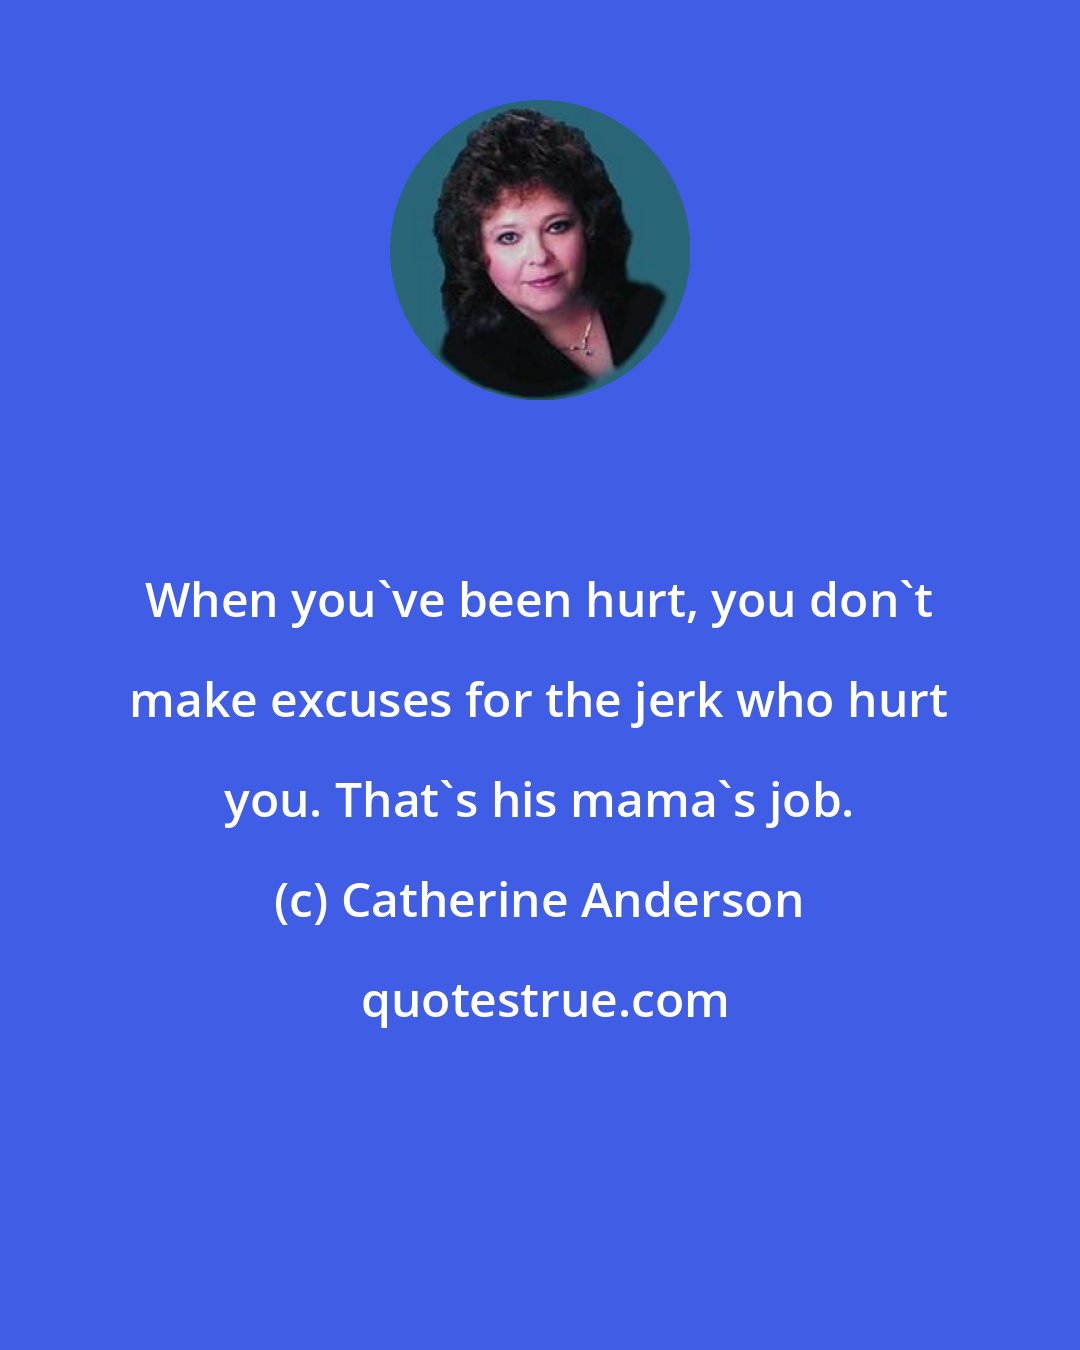 Catherine Anderson: When you've been hurt, you don't make excuses for the jerk who hurt you. That's his mama's job.